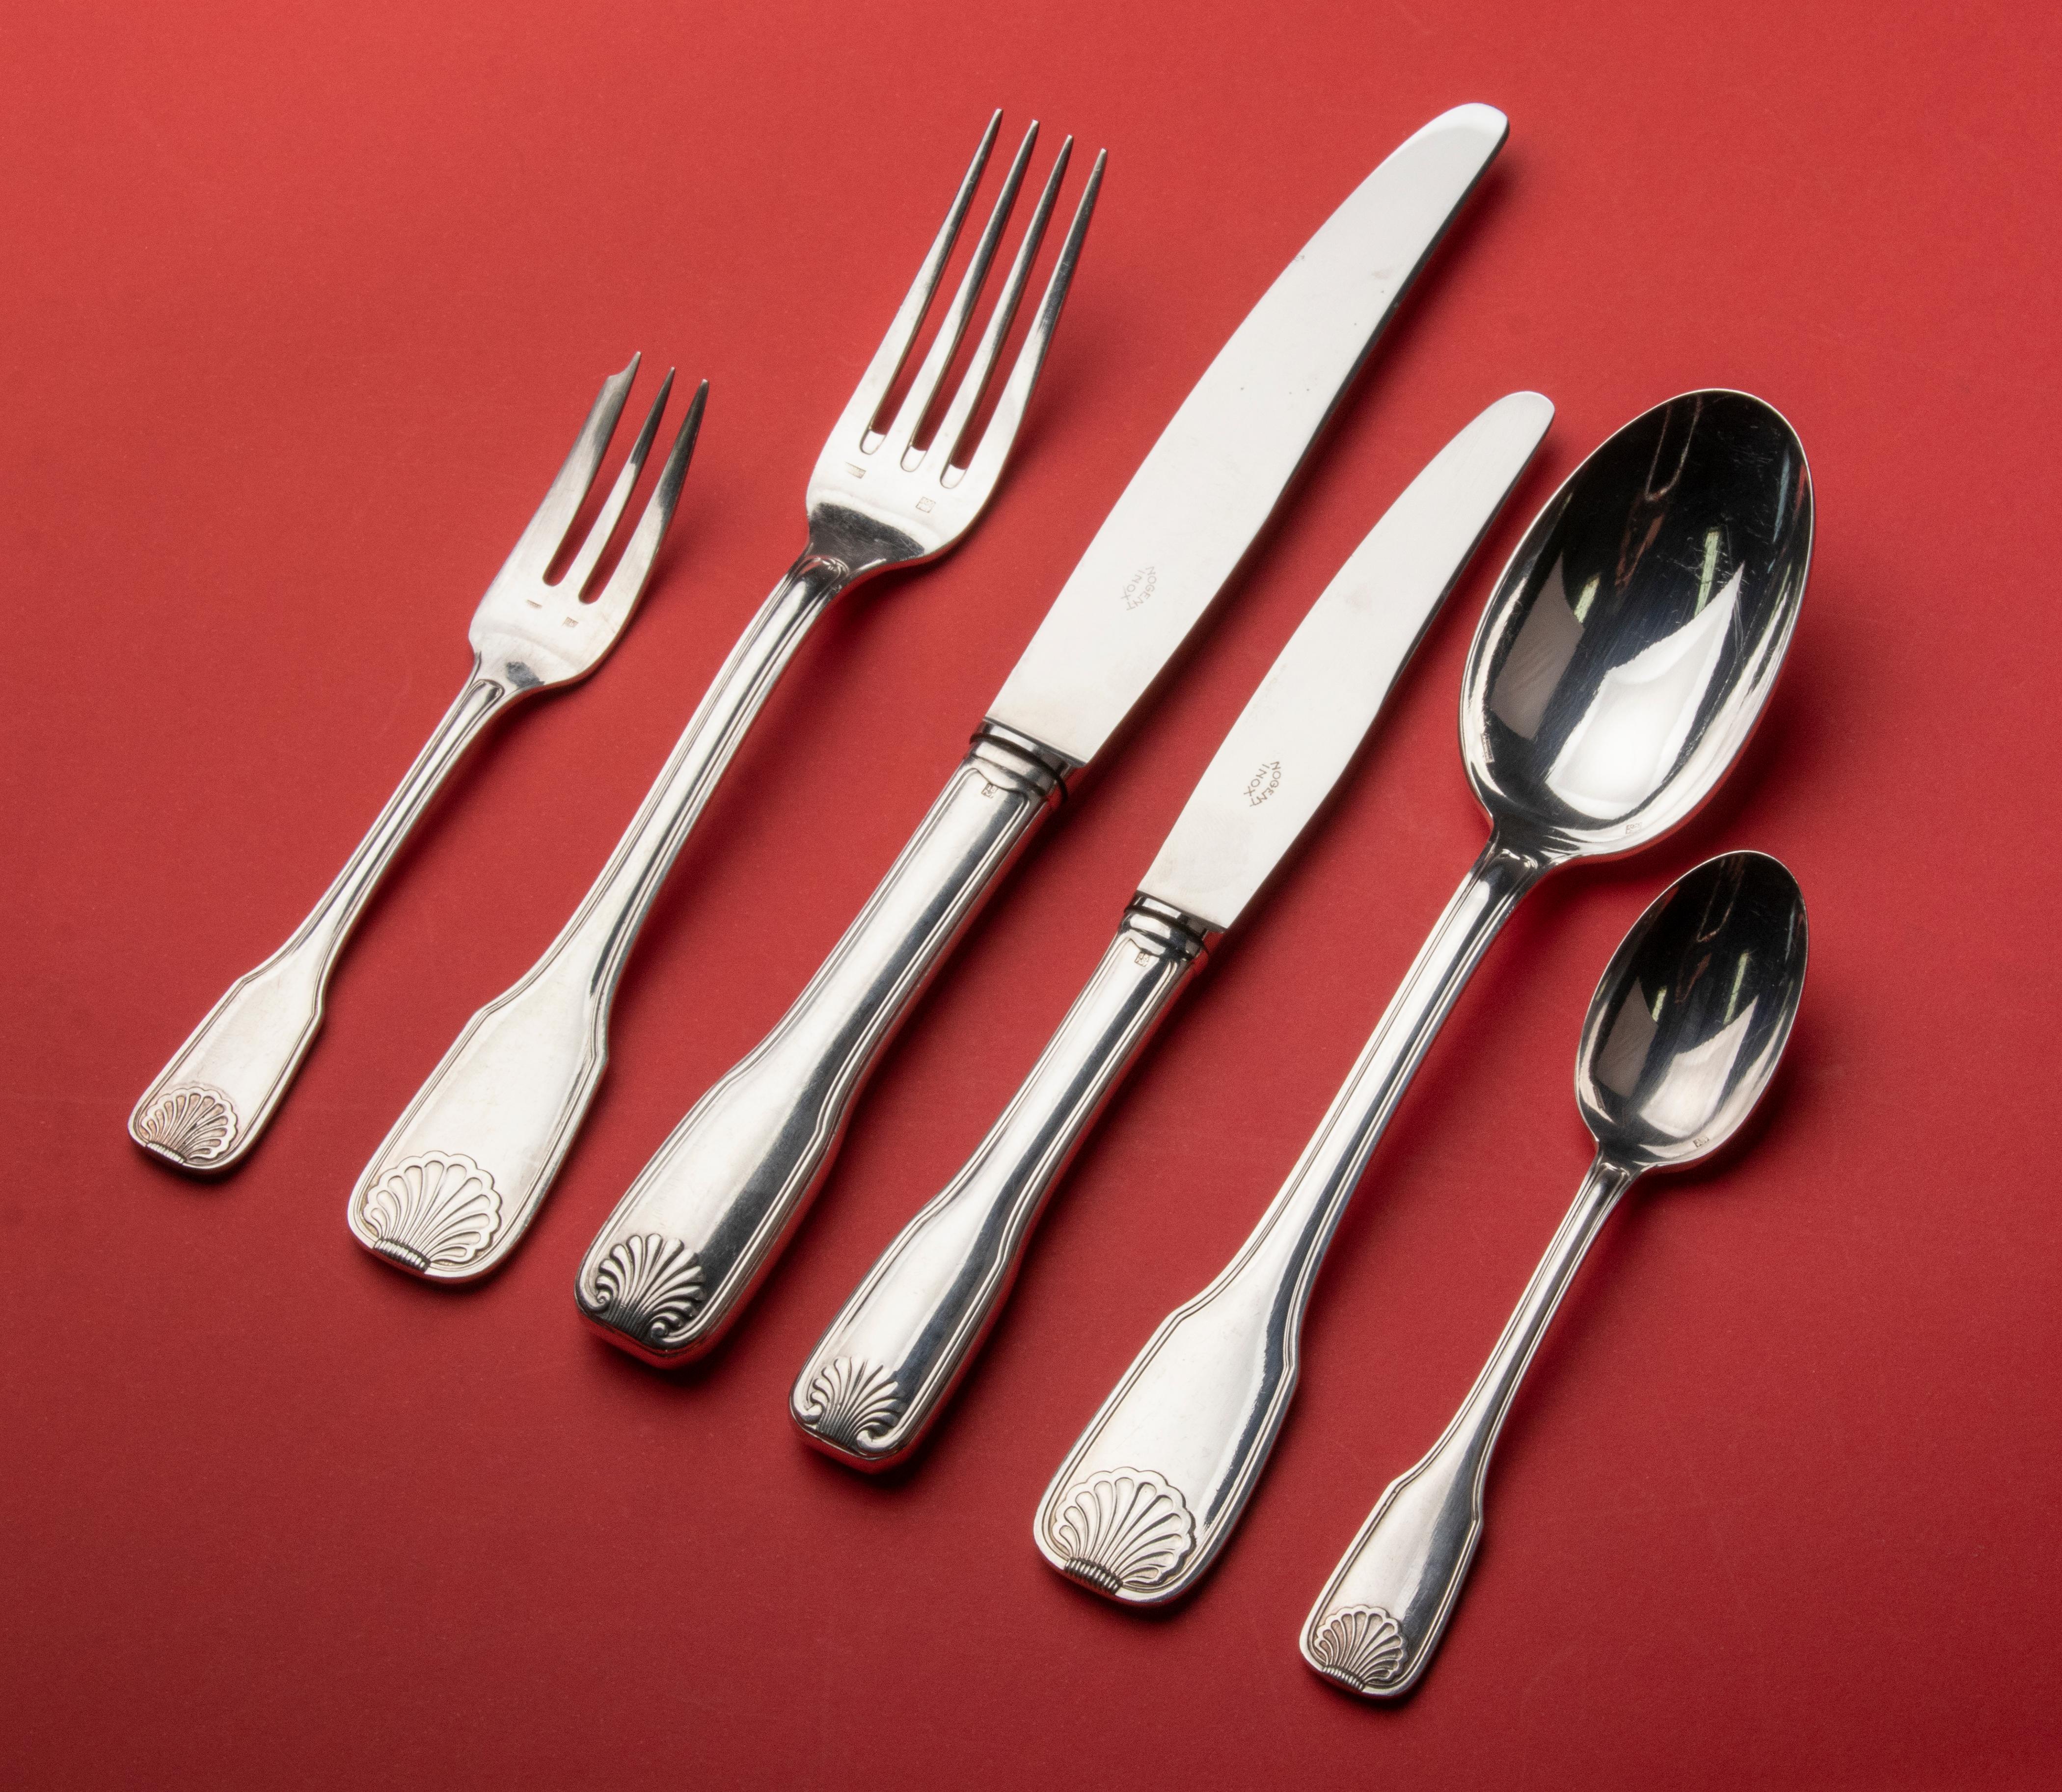 Beautiful silver plated table flatware for 12 people from the French brand Frionnet. This is a classic and timeless design, with a small shell decoration at the bottom of the handles. François Frionnet, a master silversmith located in Paris is known